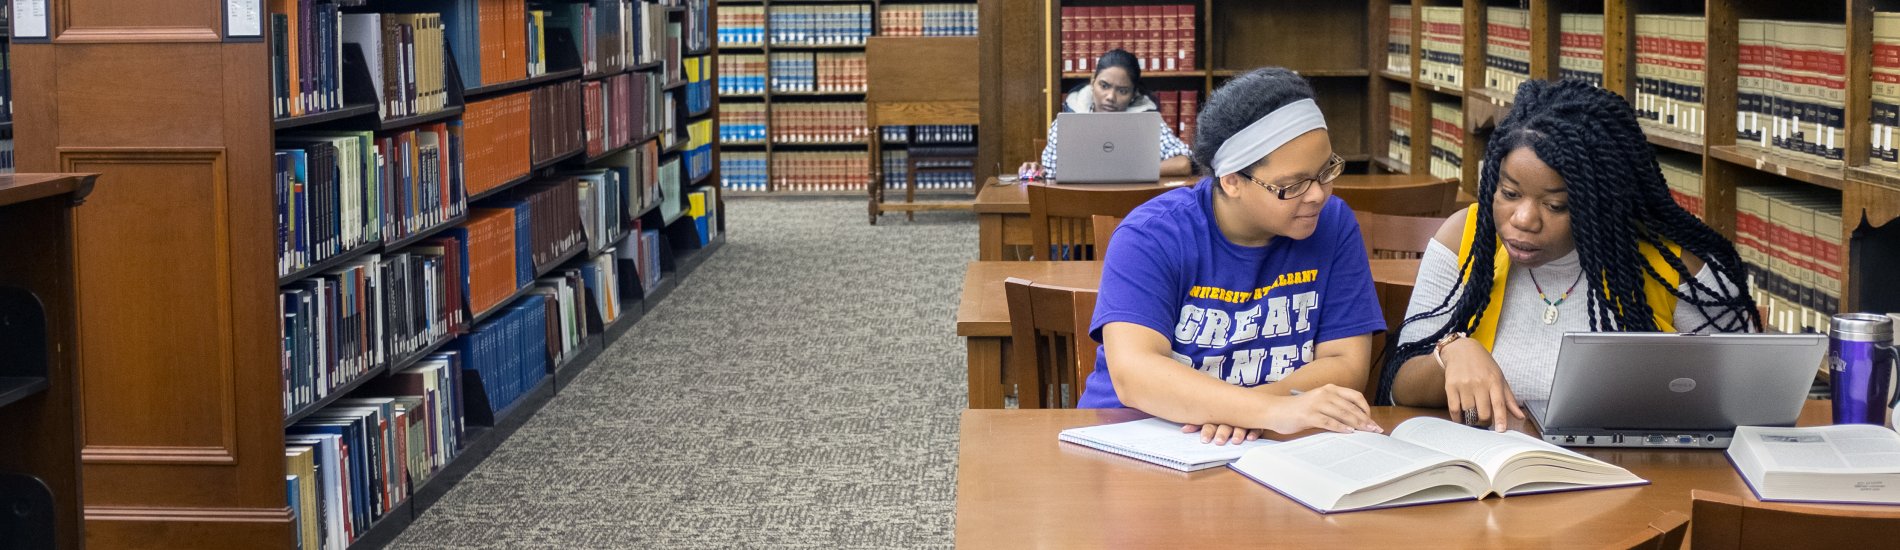 Students studying in the Dewey Library.